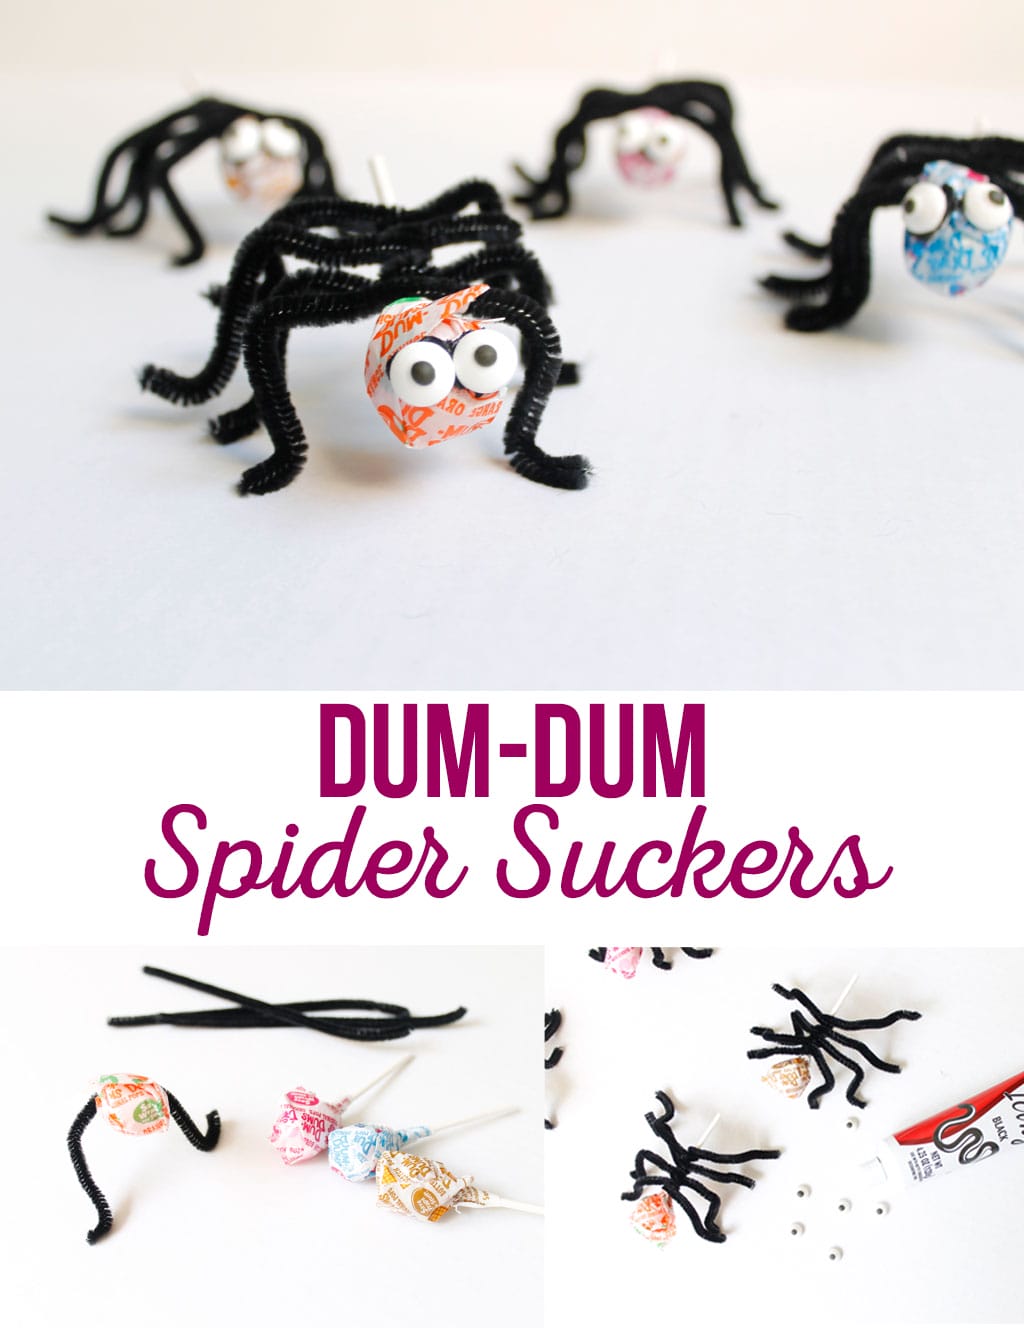 Dum-Dum Spider Suckers are a quick and easy treat for any Halloween party. A fun way clever way to be creative without spending tons of money.